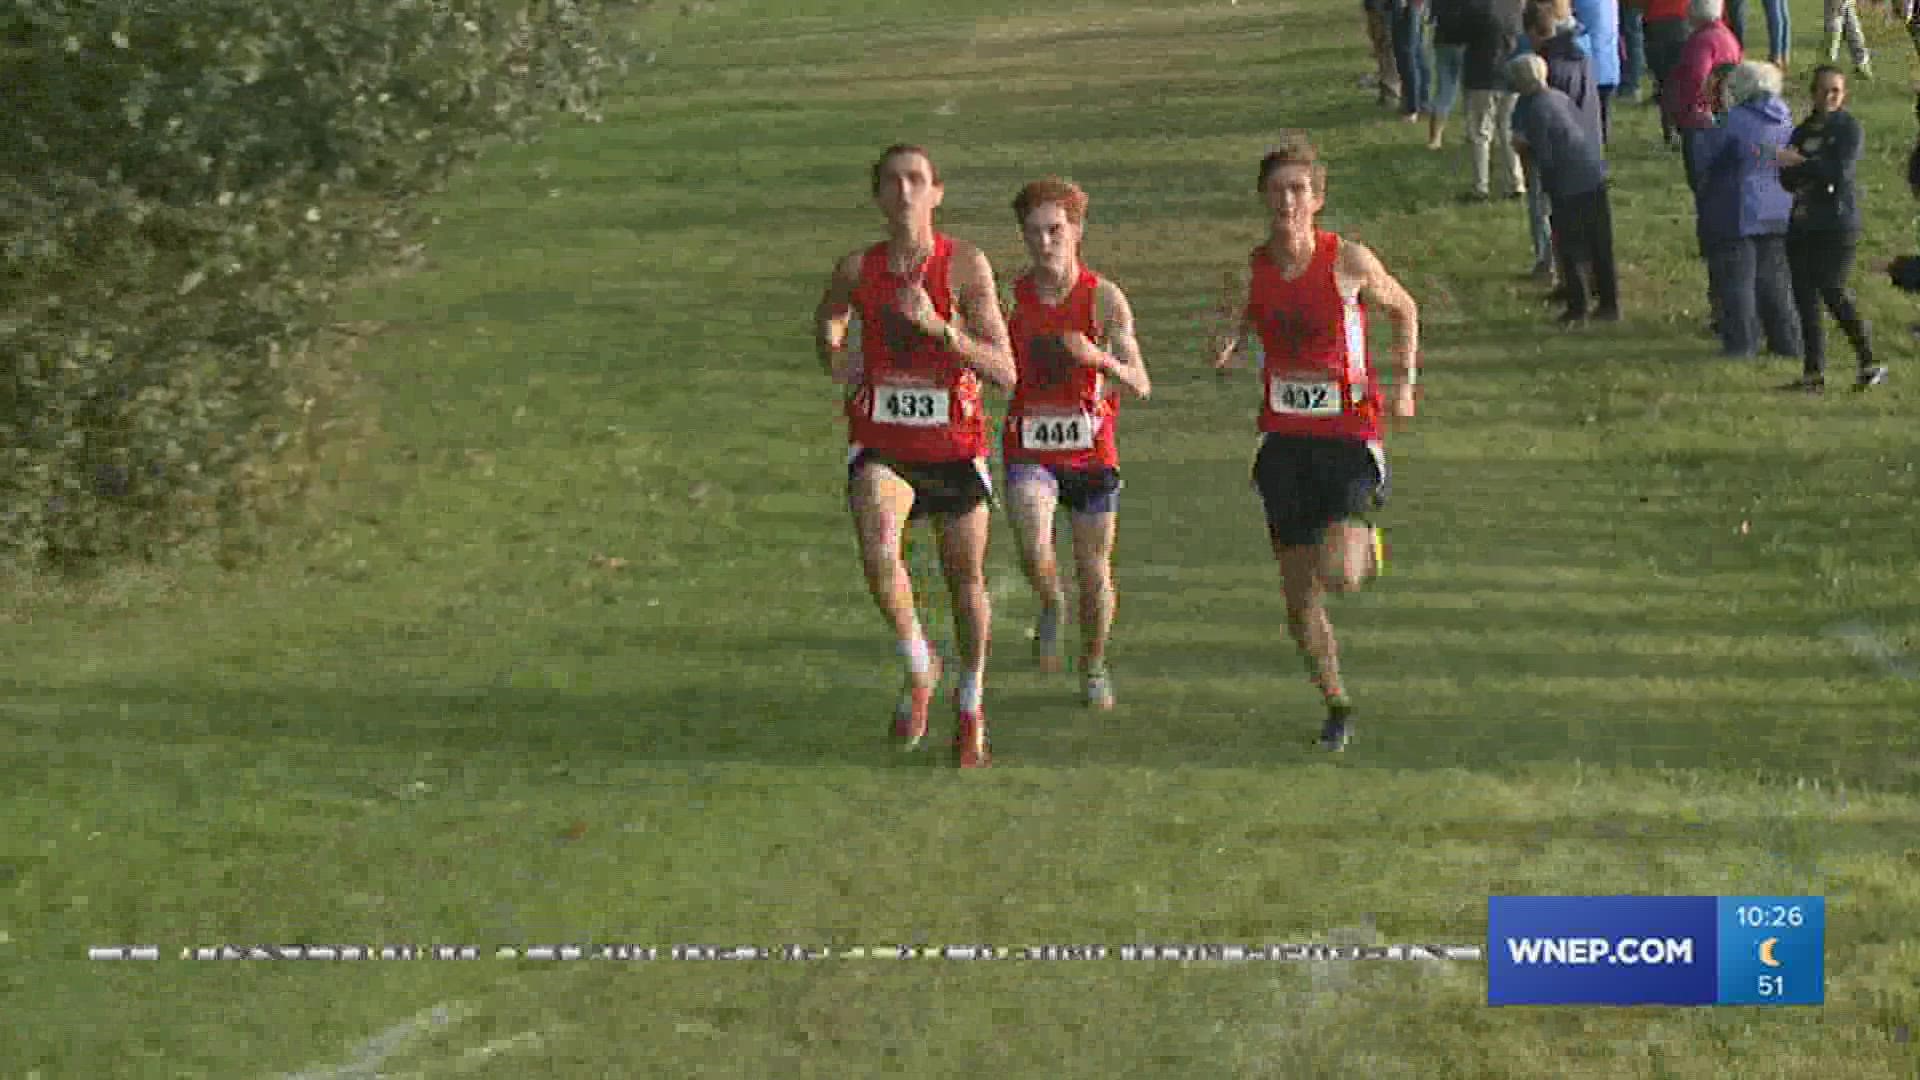 With Caleb Kenyon, Aiden Horne, and Mason Natalini finished 1-2-3, North Pocono won a cluster XC Meet at Abington Hts.